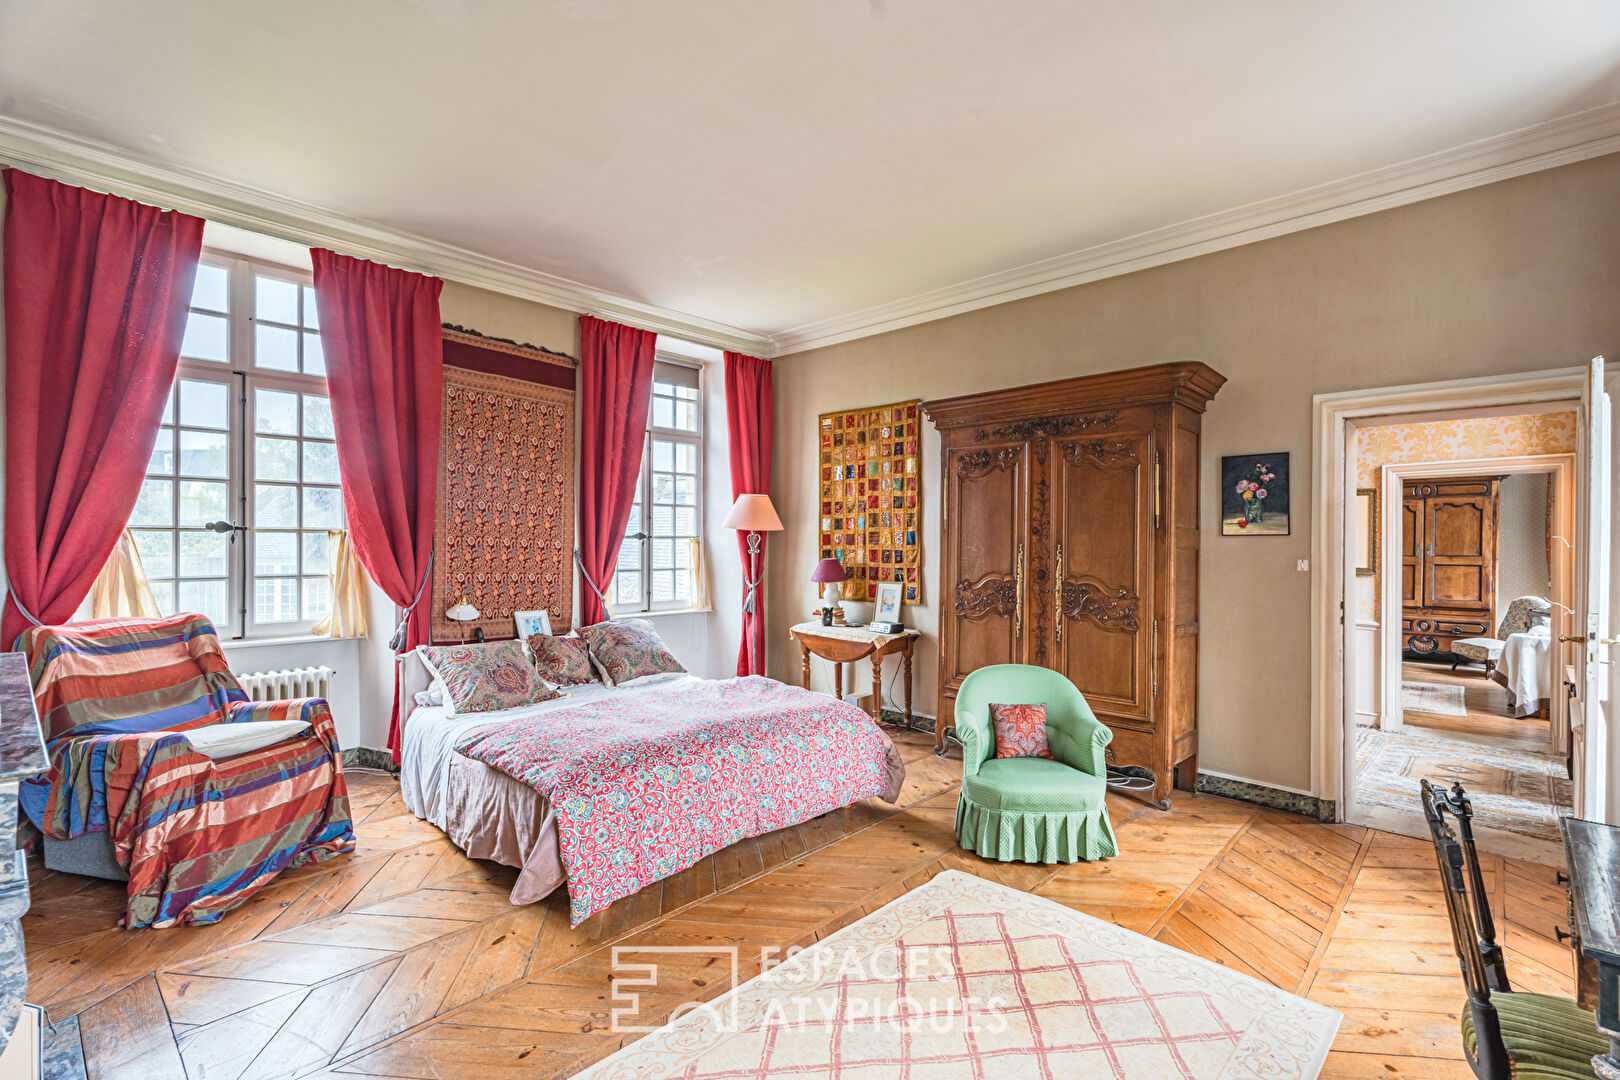 Beautiful 18th century residence in the town center of Valognes